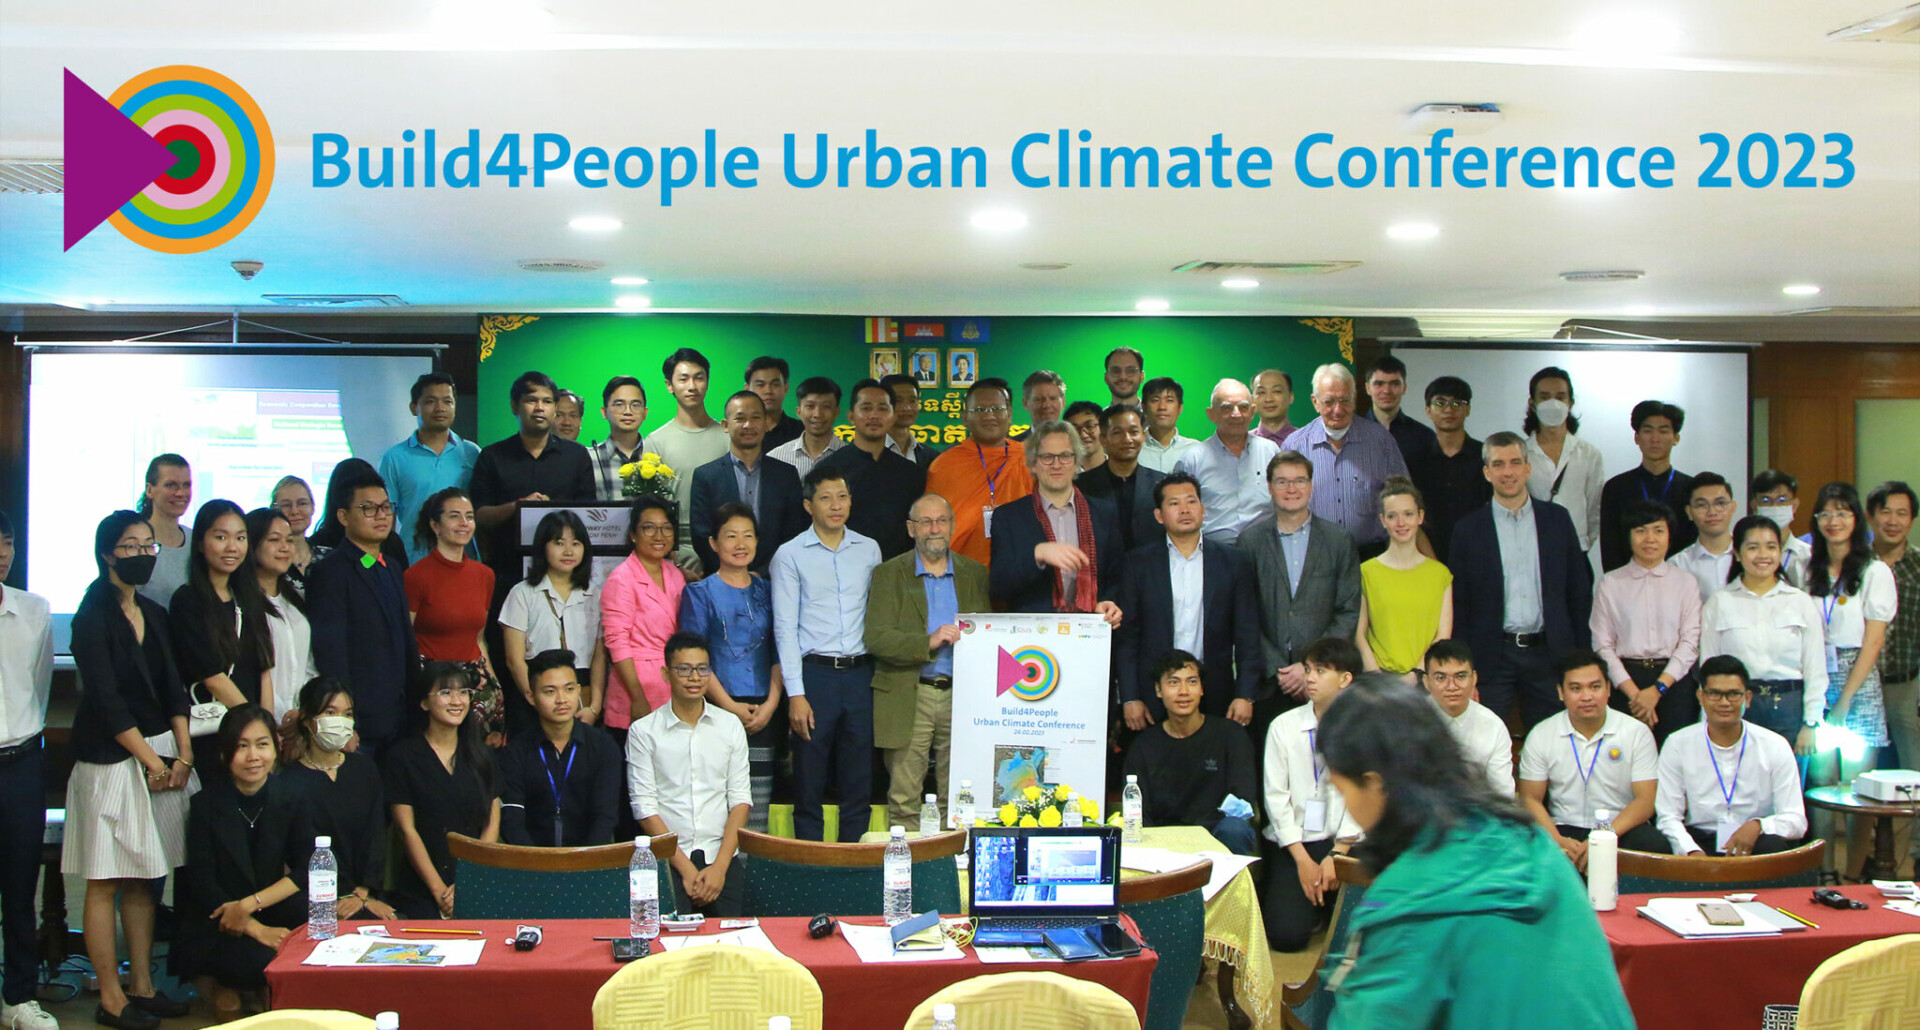 2023 02 24 B4P Urban Climate Conference 001 caption 2048x1099 1 scaled